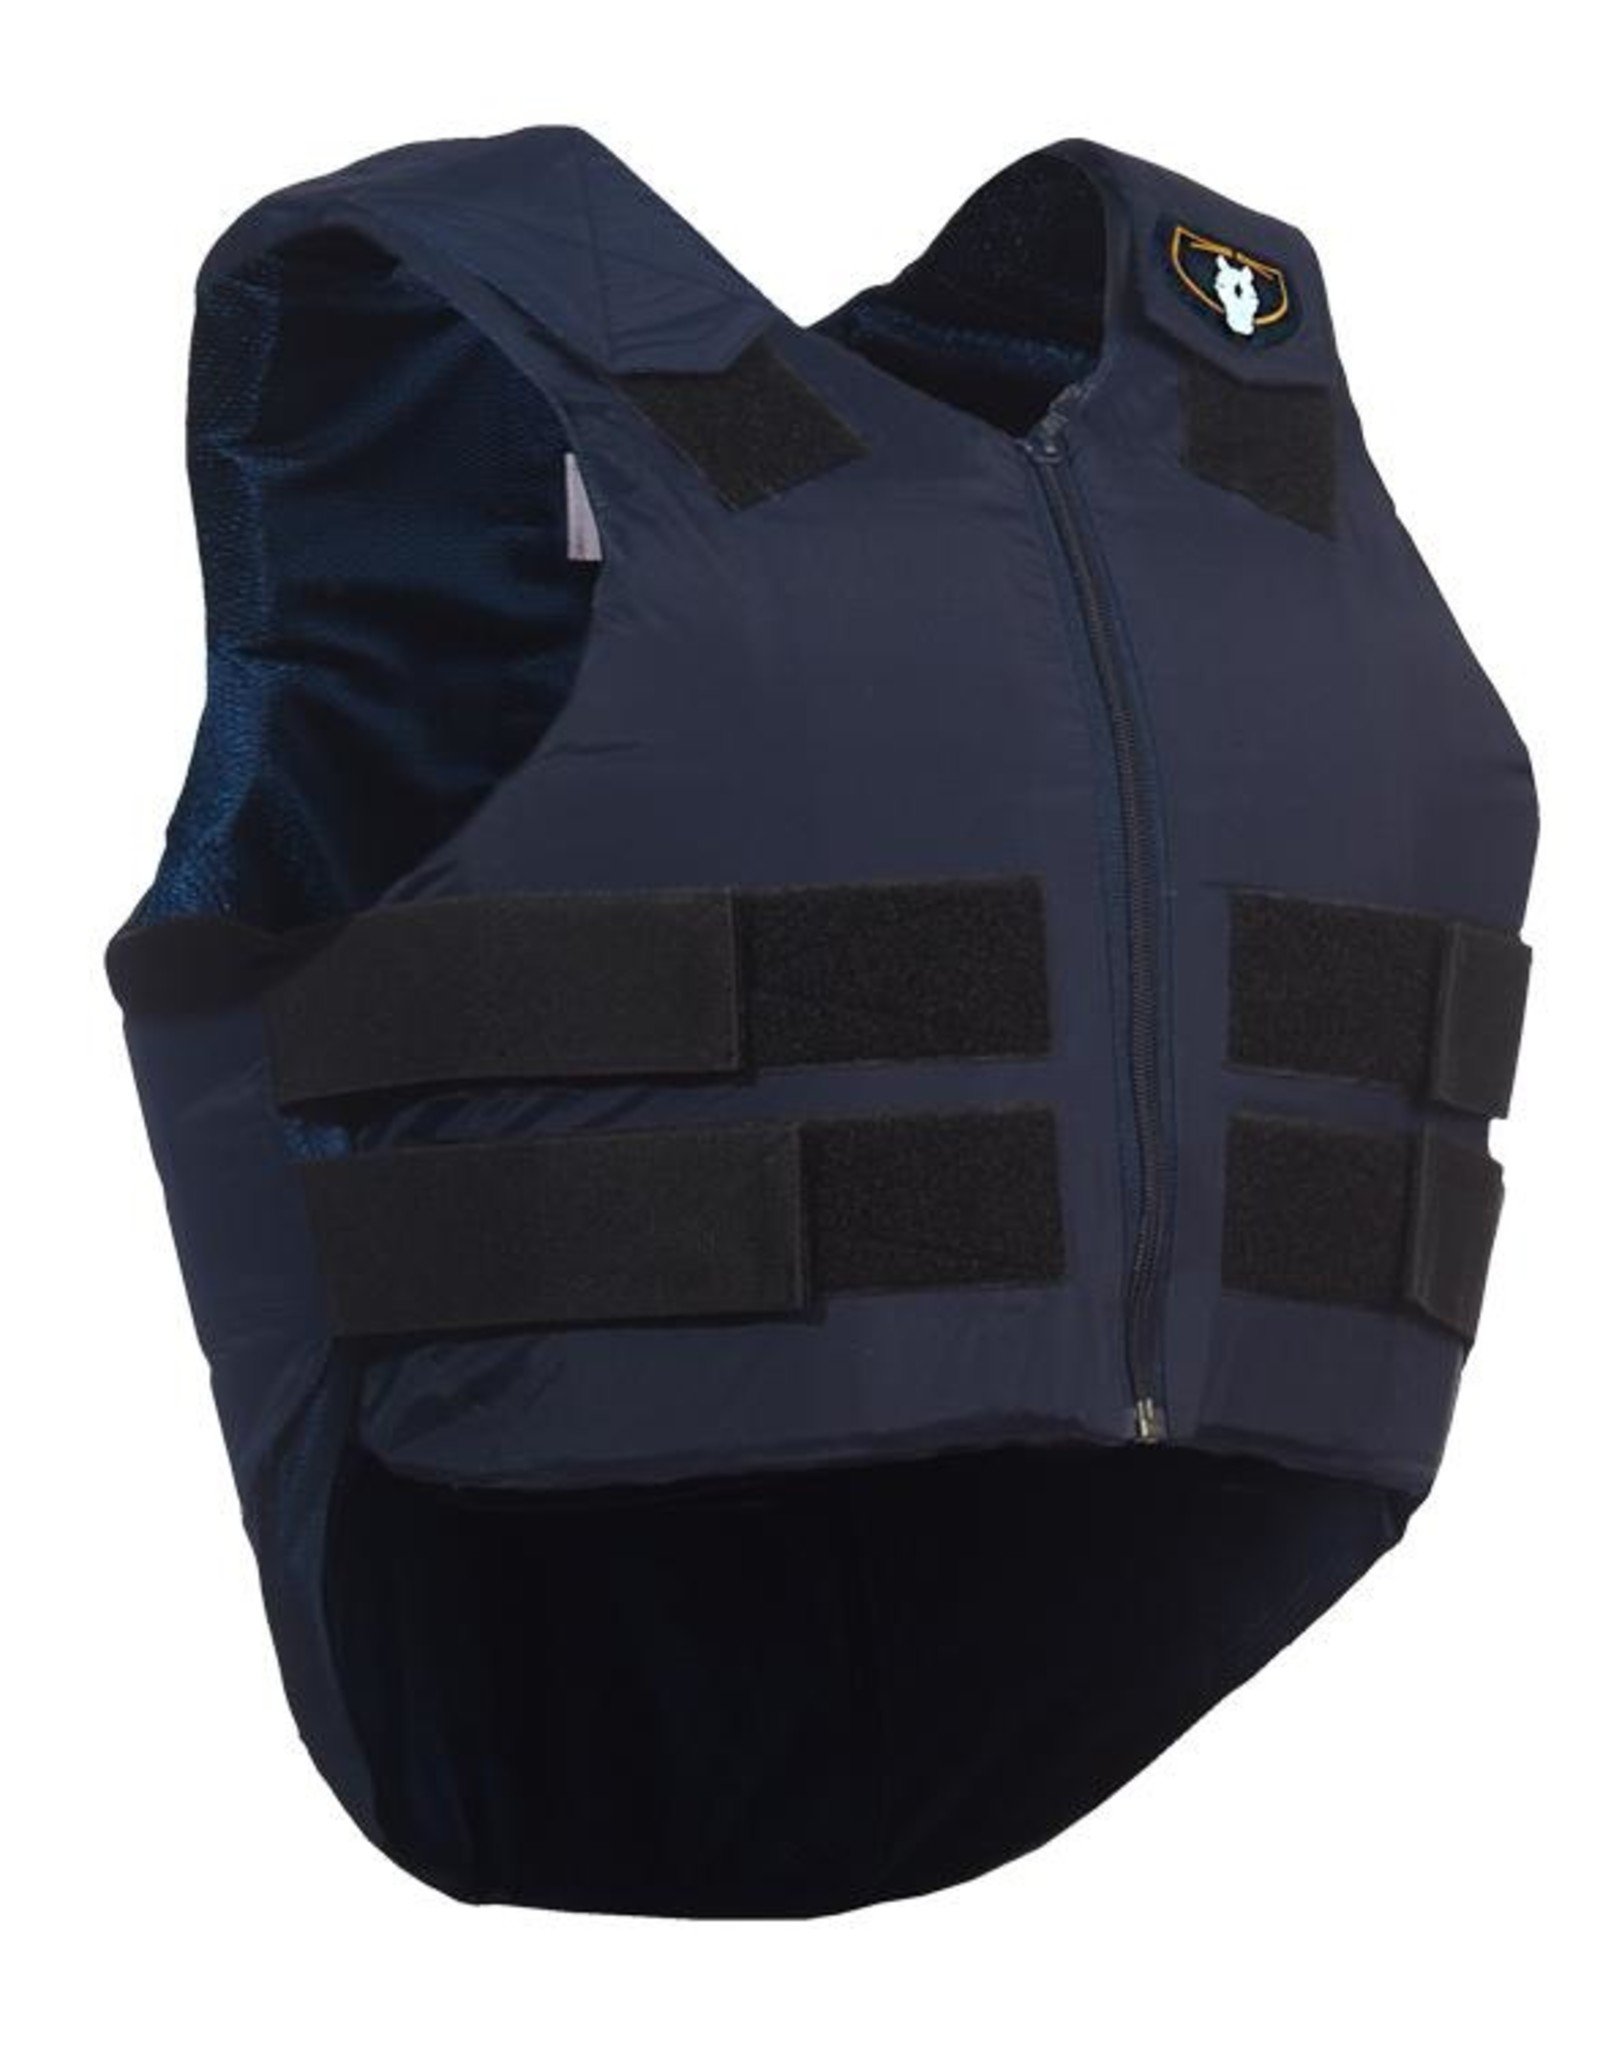 Tipperary RIDE-LITE Youth Protective Horse Riding Vest